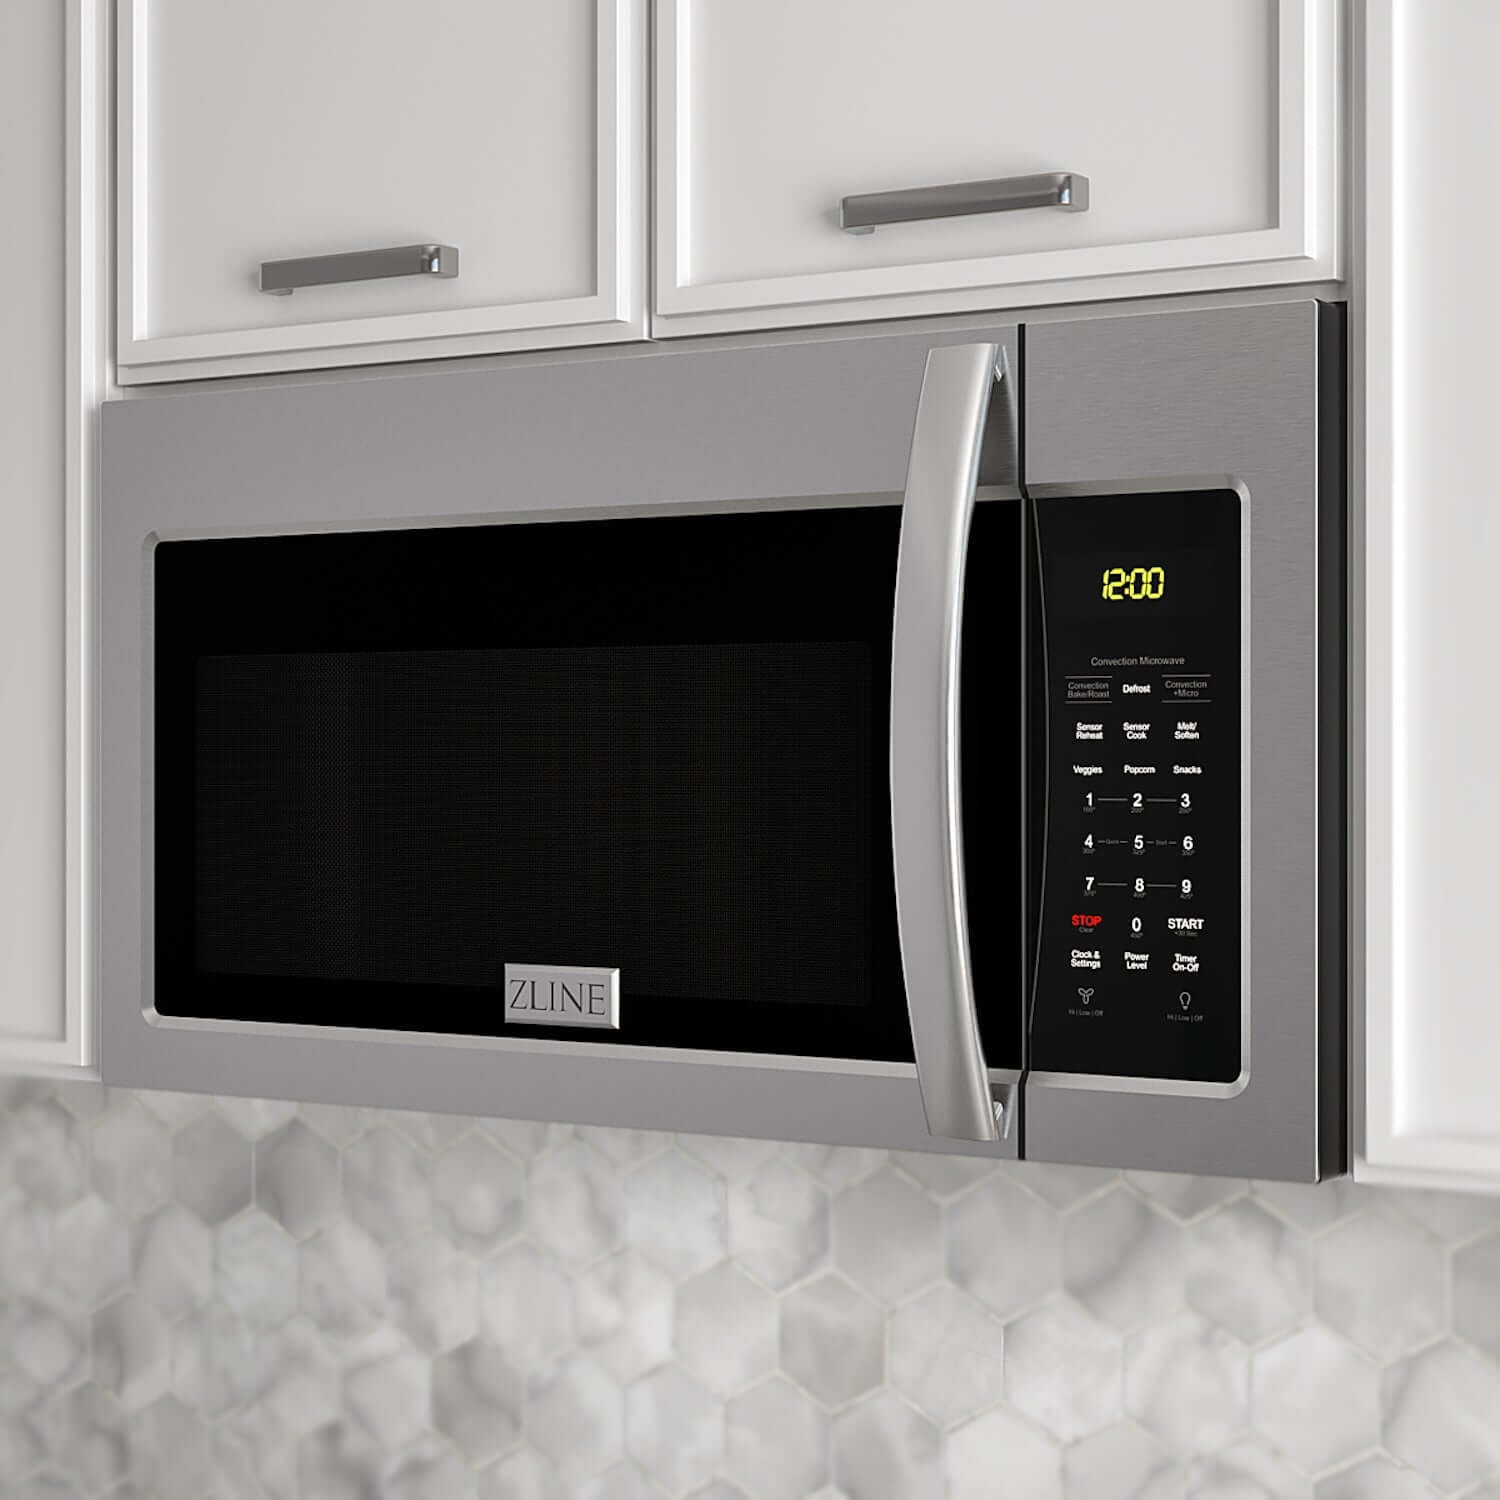 ZLINE 30" Over the Range Microwave close up in a kitchen.